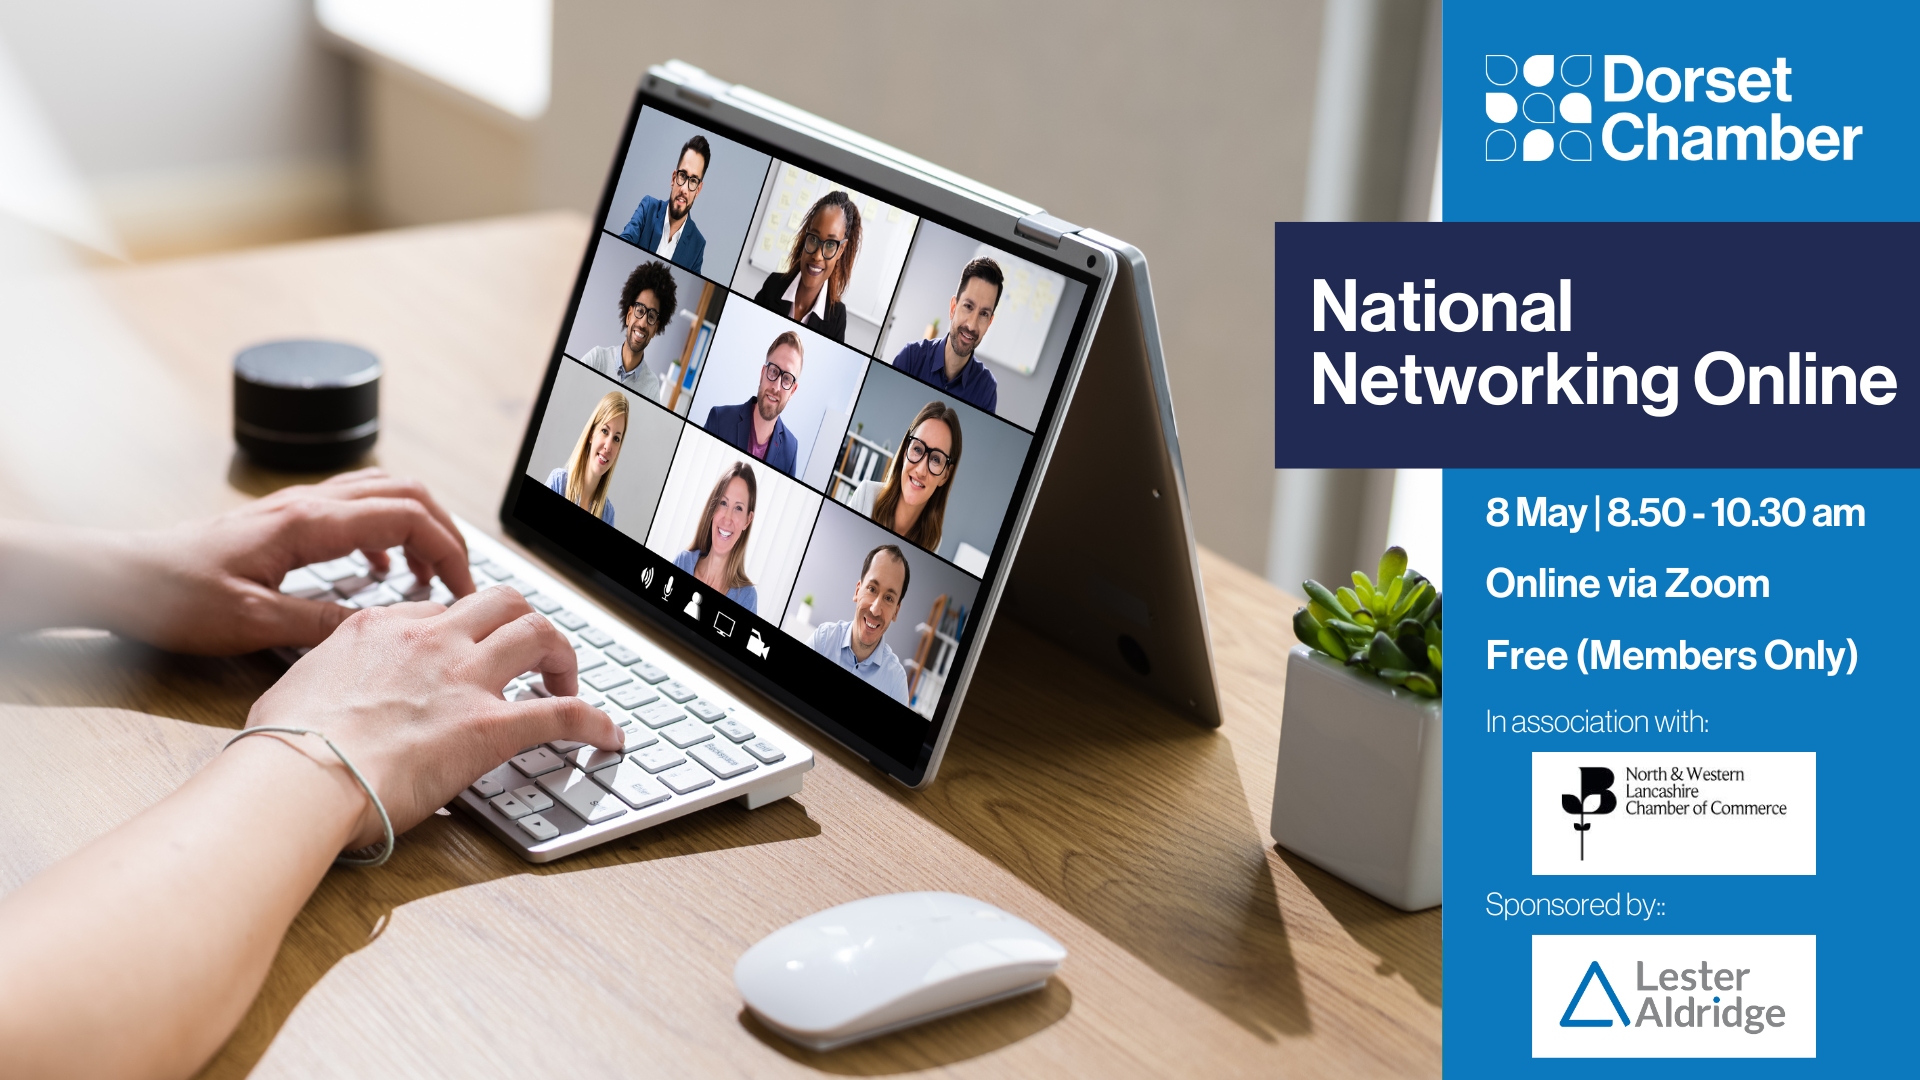 National Networking Online with North & Western Lancashire Chamber of Commerce